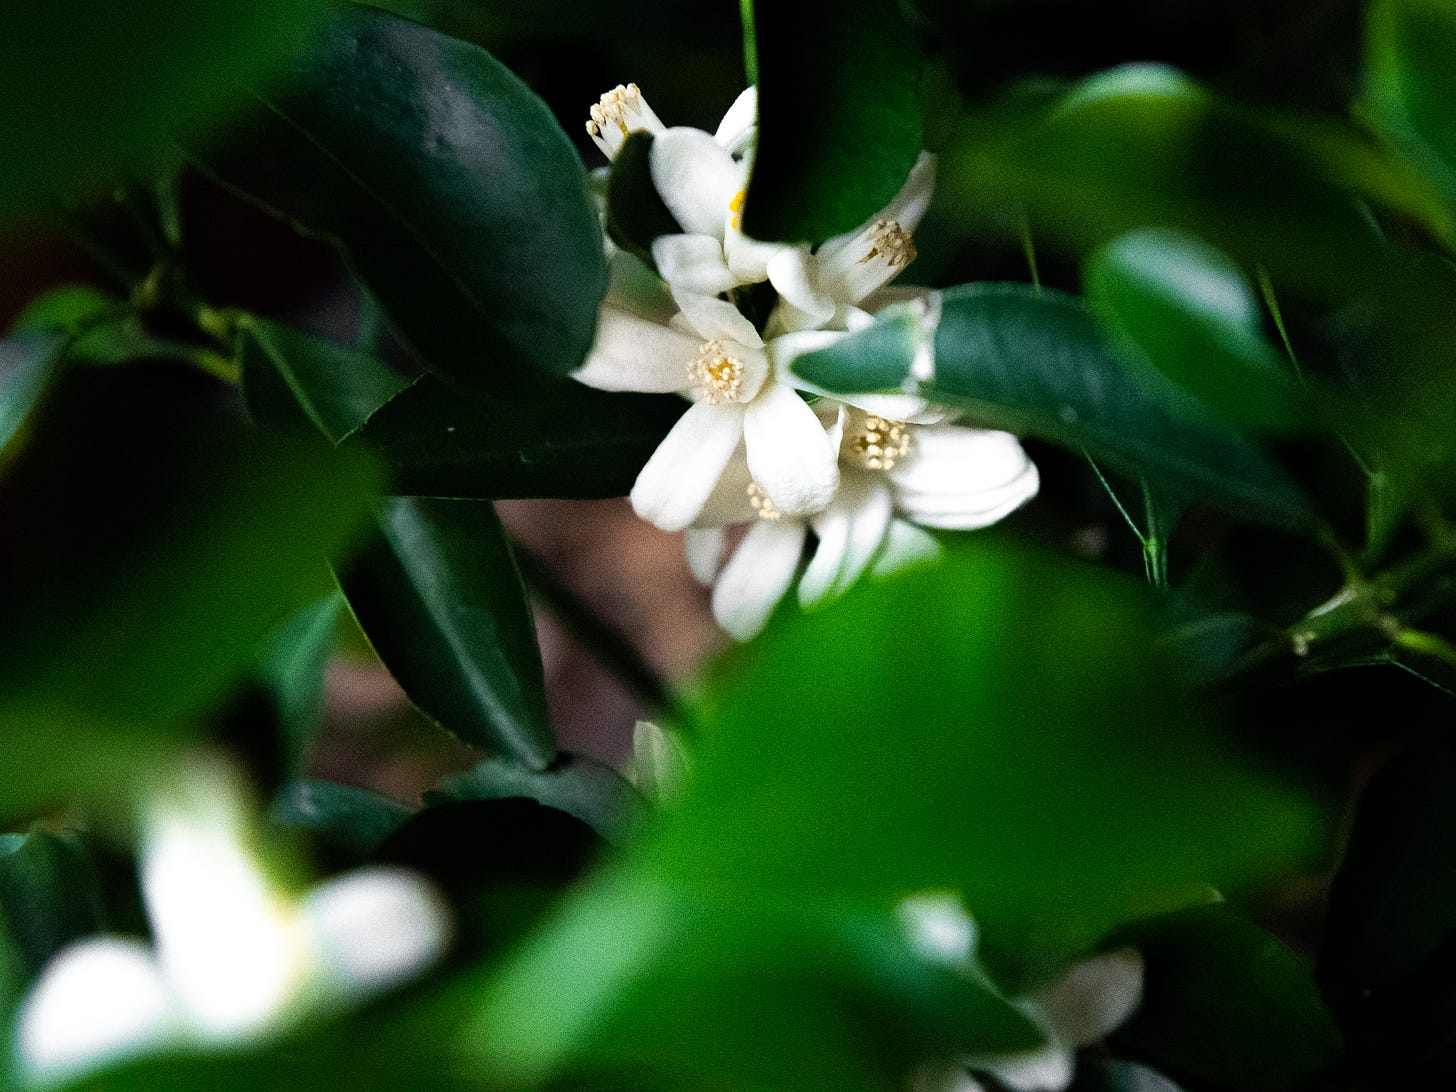 ID: Up close photo of dark green citrus leaves and bright white five petaled blossoms